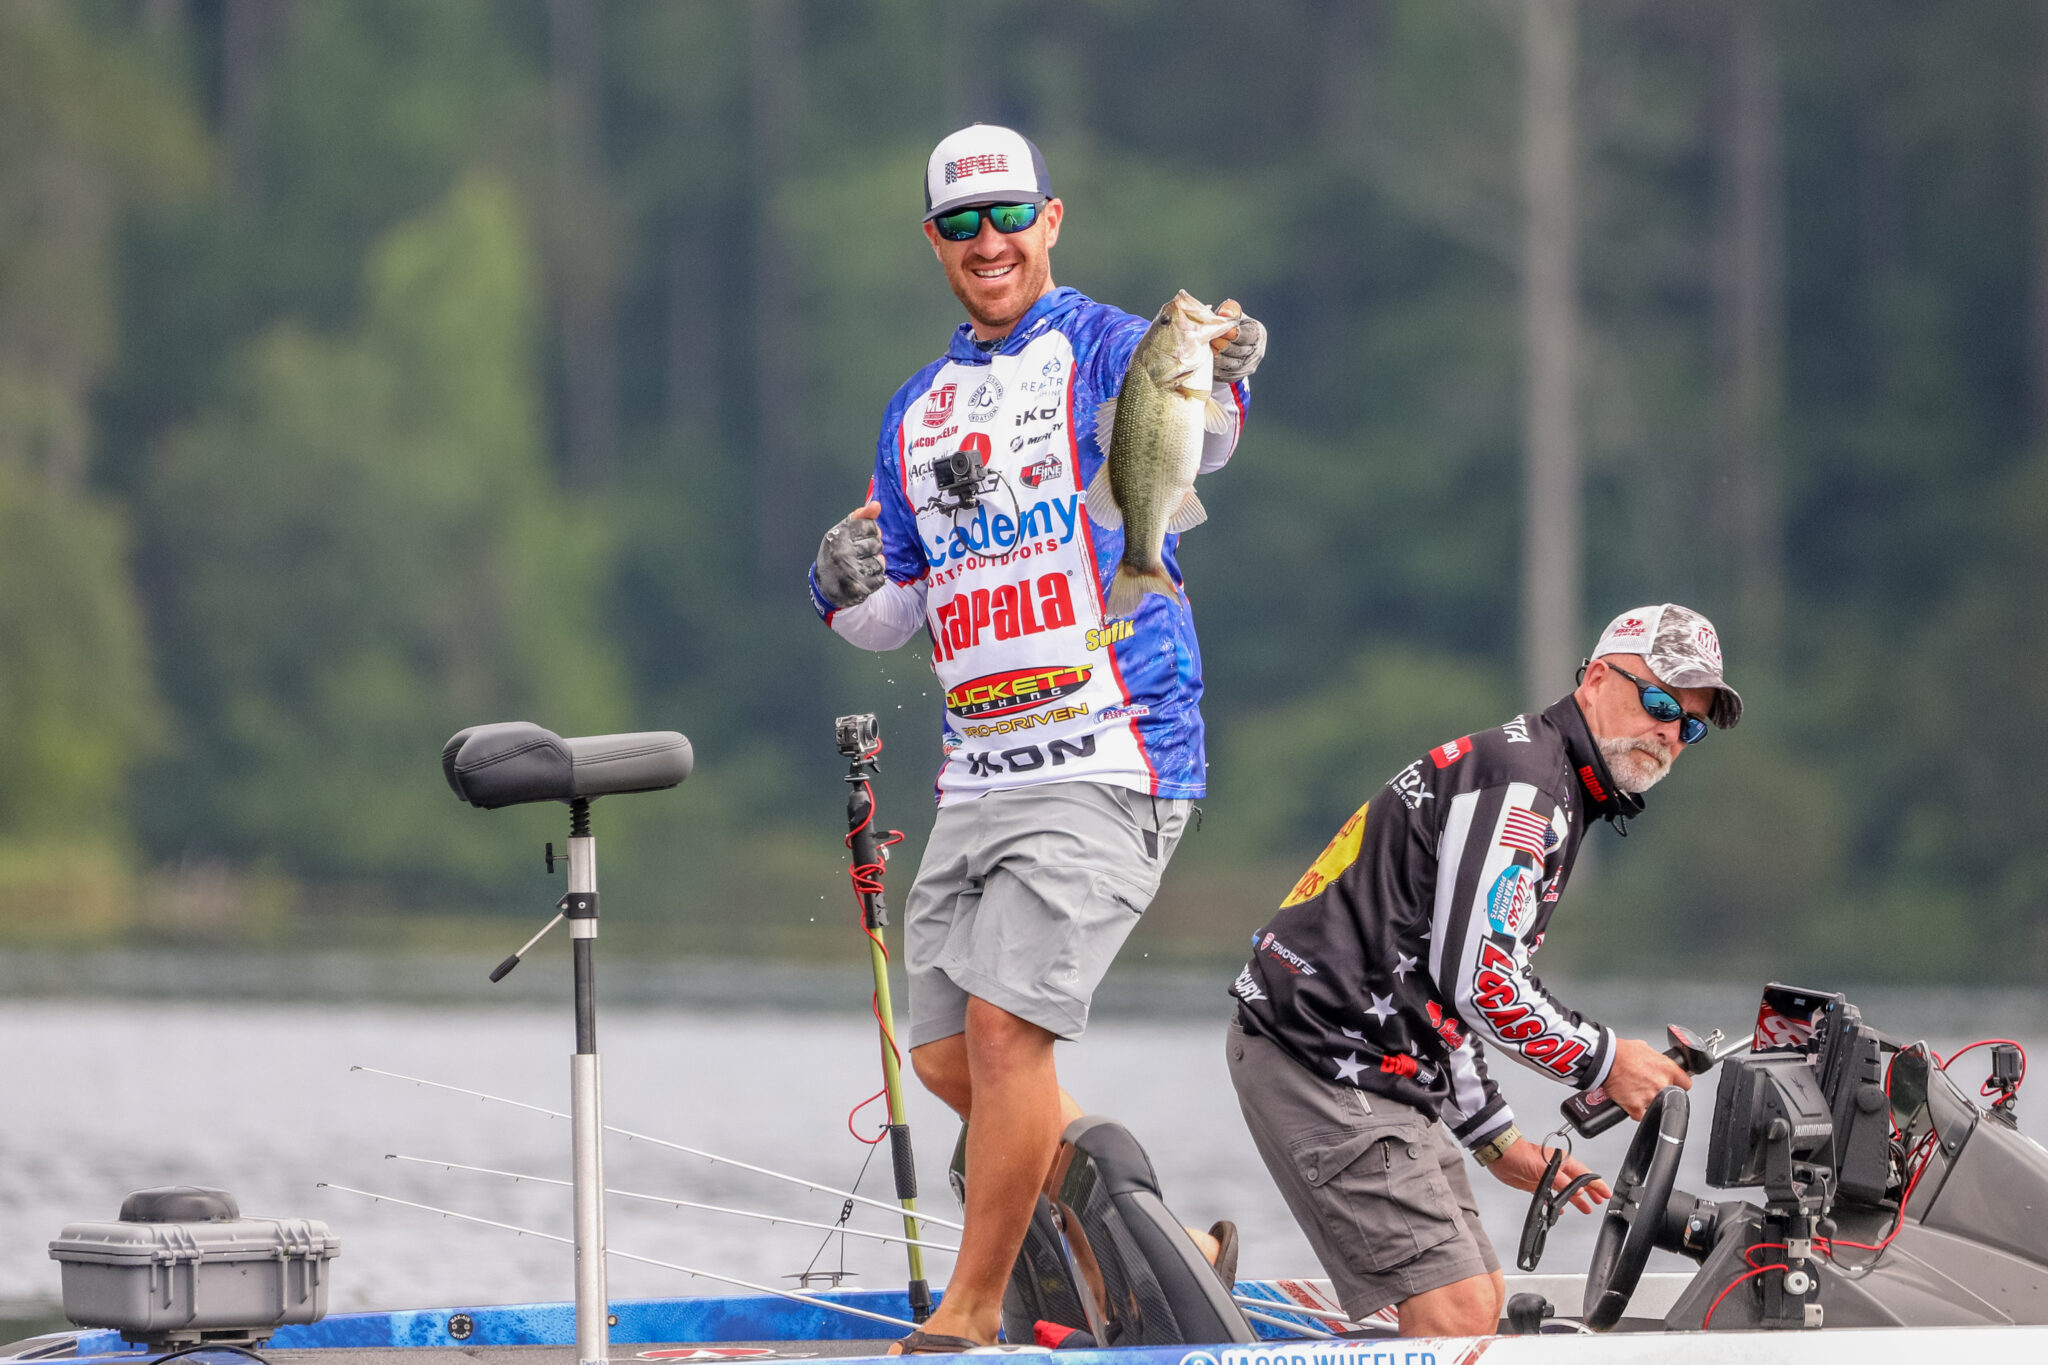 MIKE IACONELLI: There's Nothing Stupid About the Top Secret Stupid Tube! -  Major League Fishing